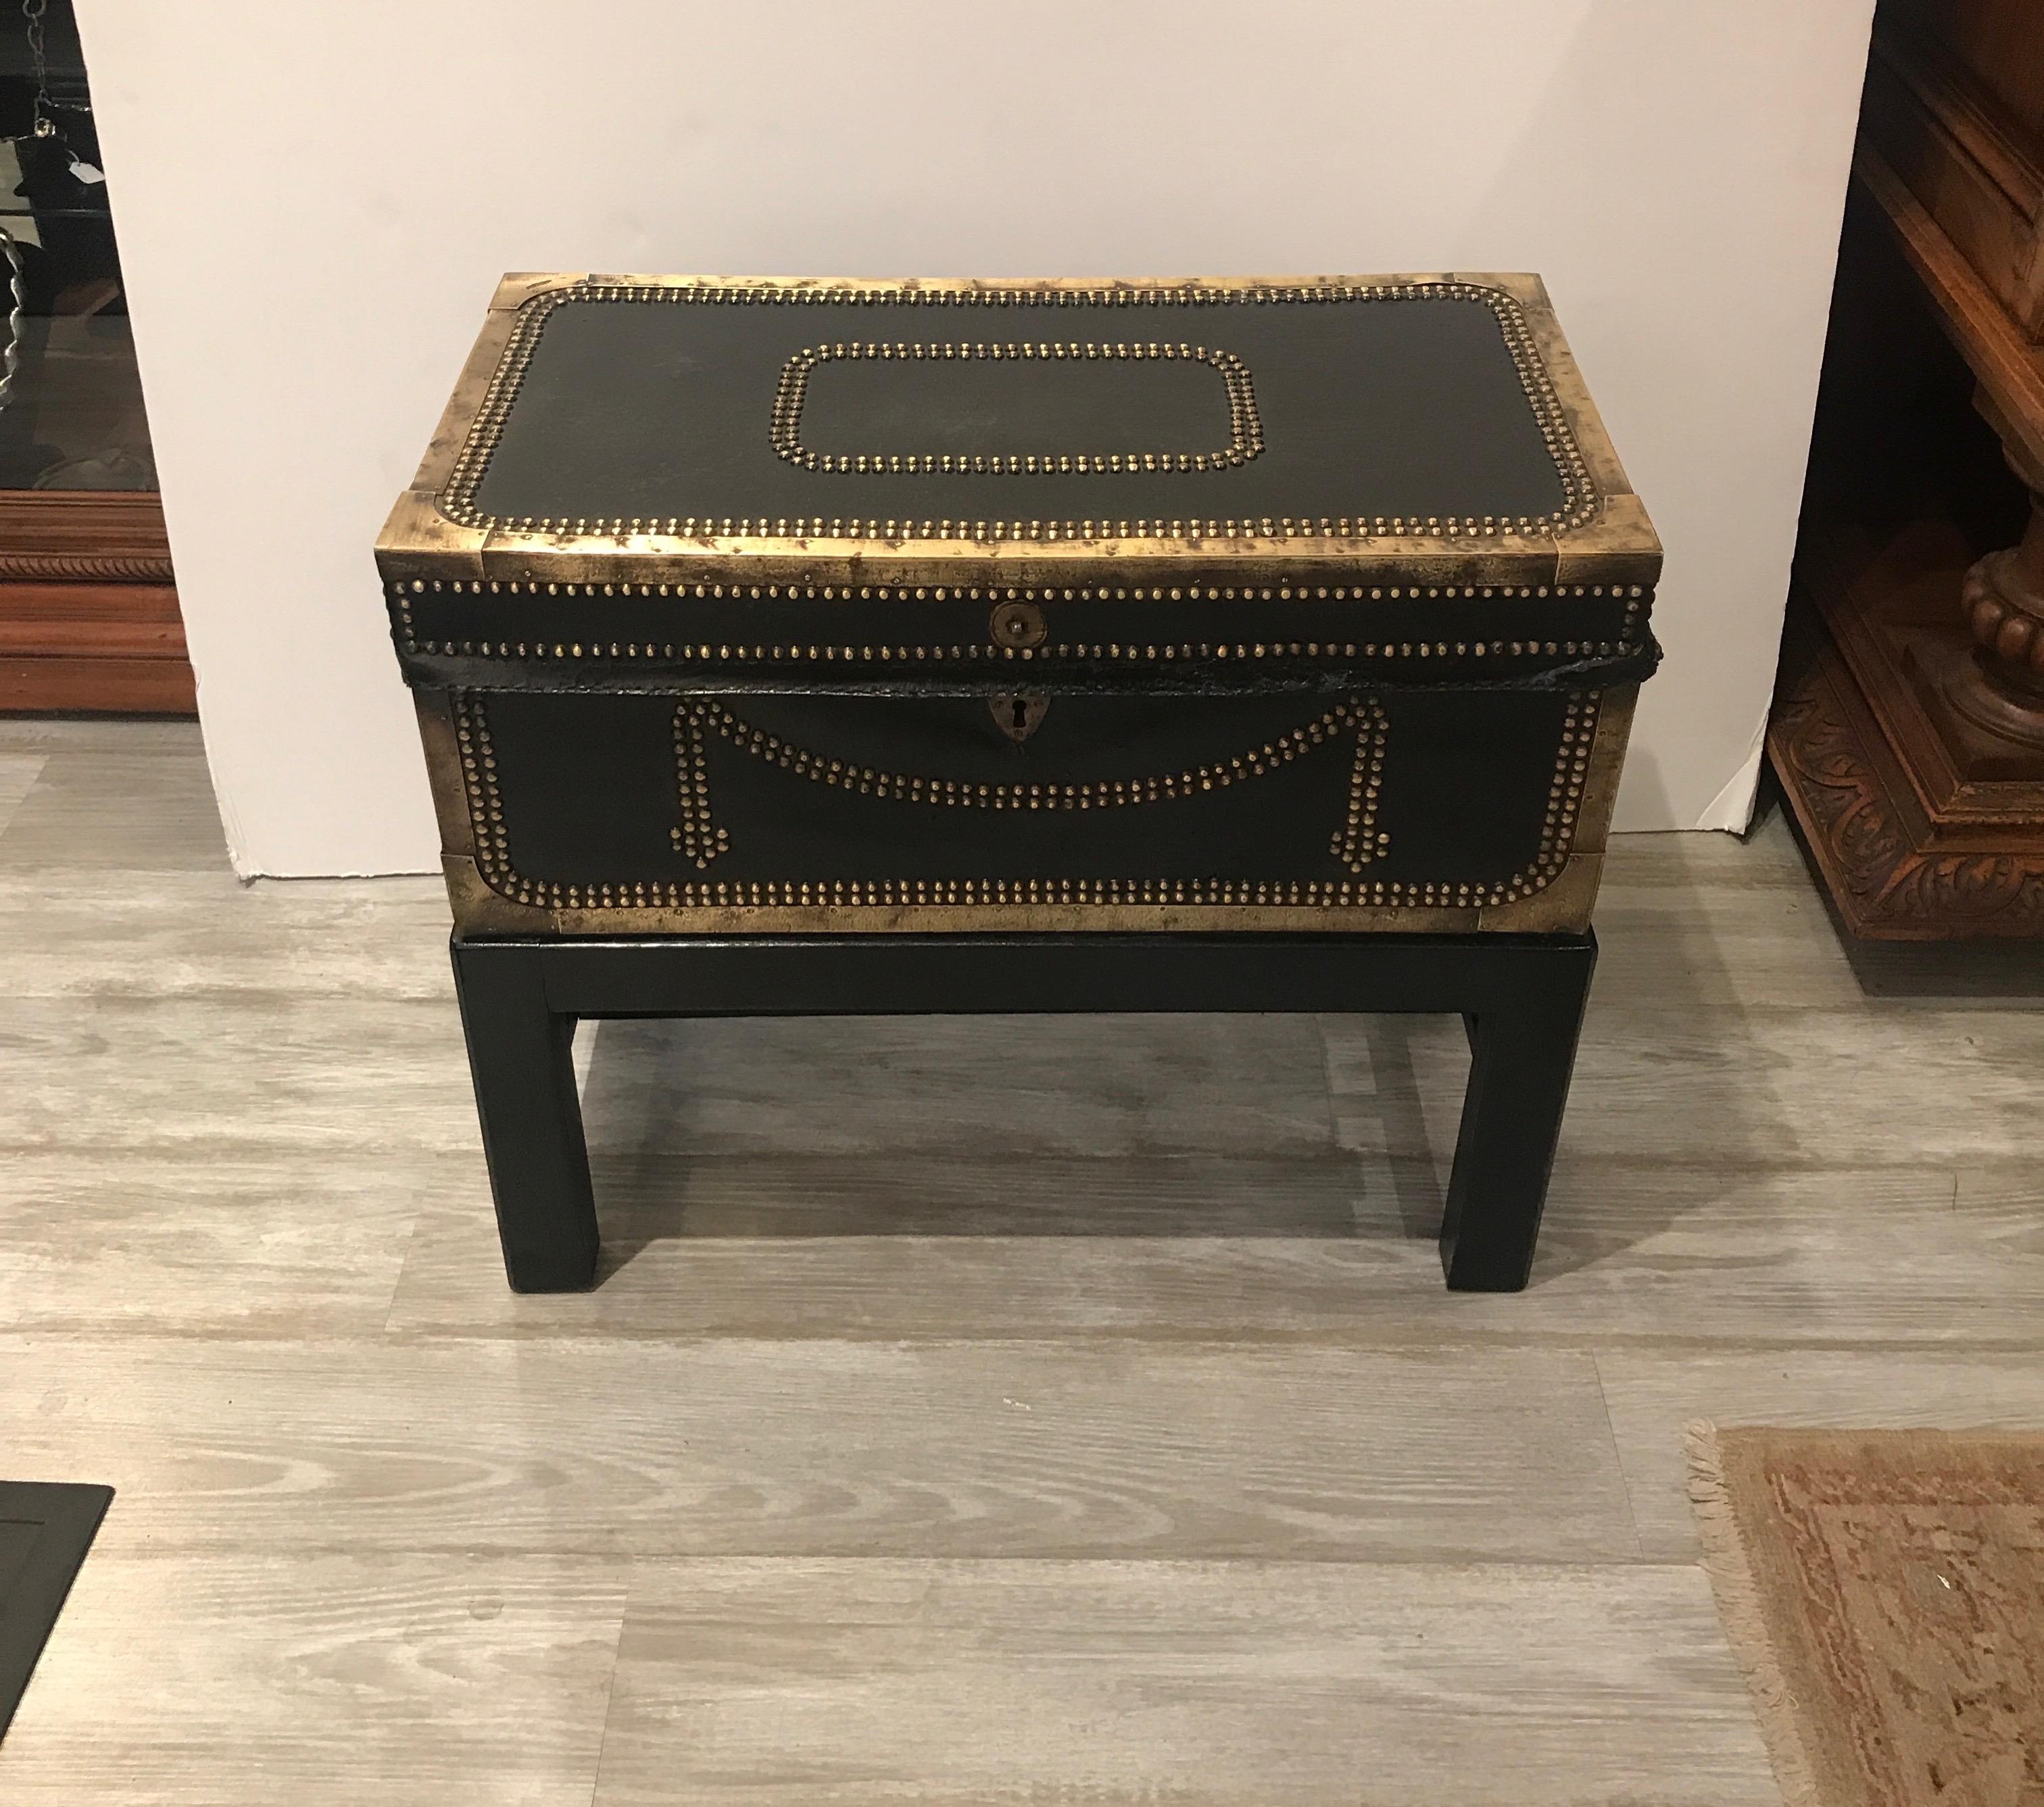 English Mid-19th Century Leather and Brass Mounted Box on Stand